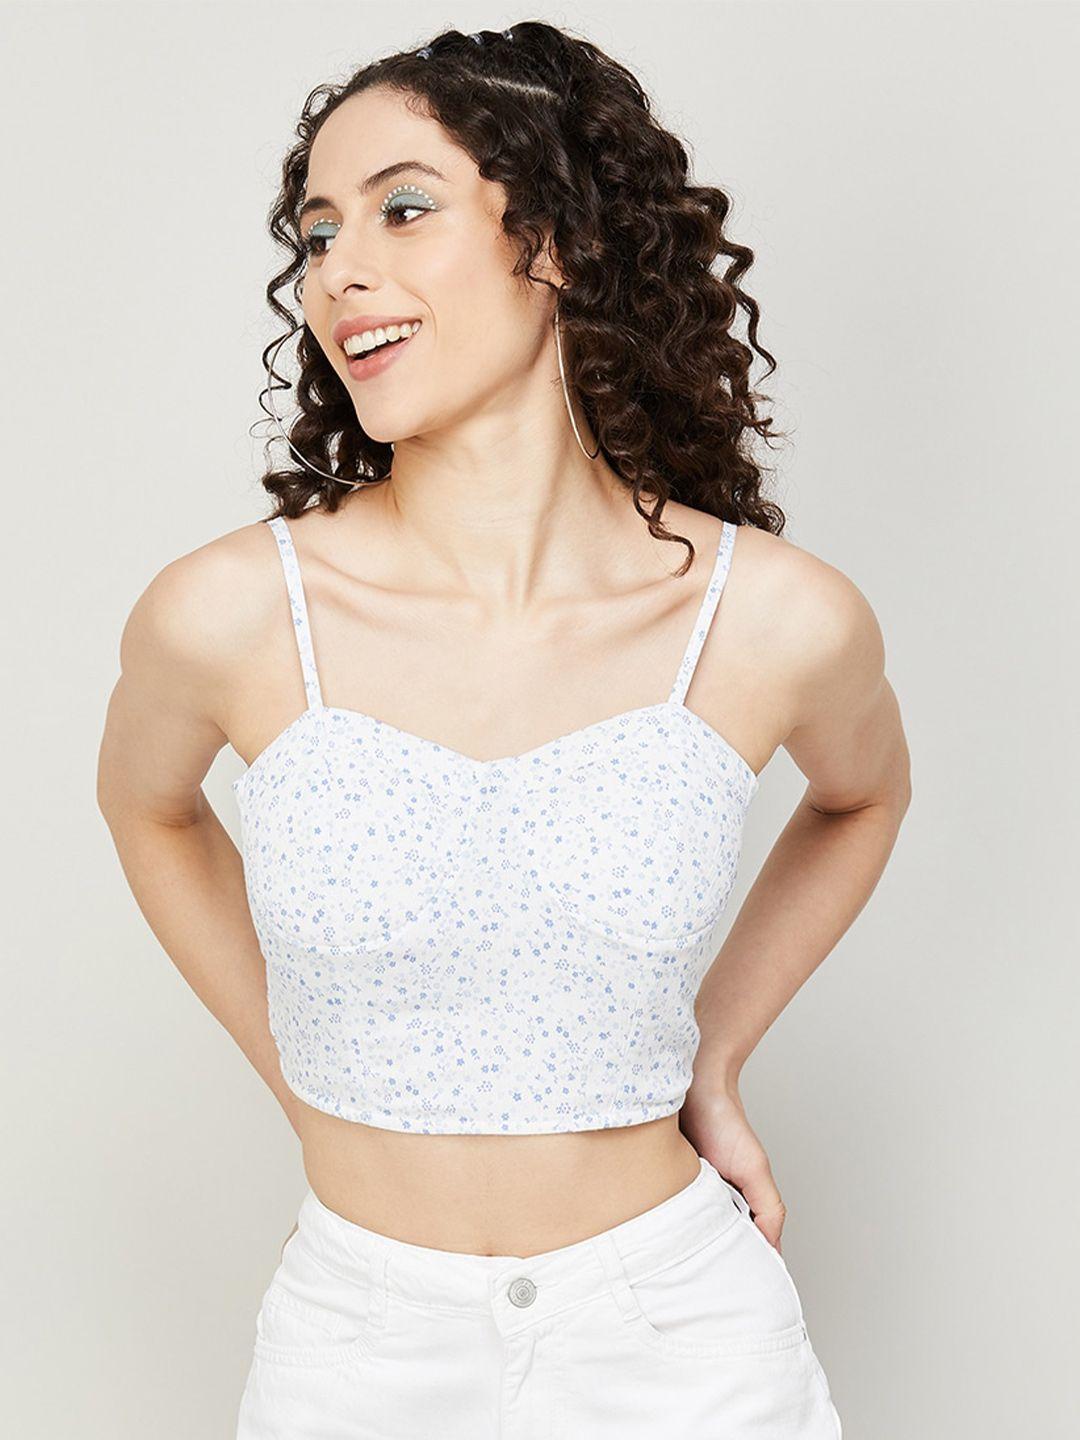 ginger by lifestyle floral bralette crop top